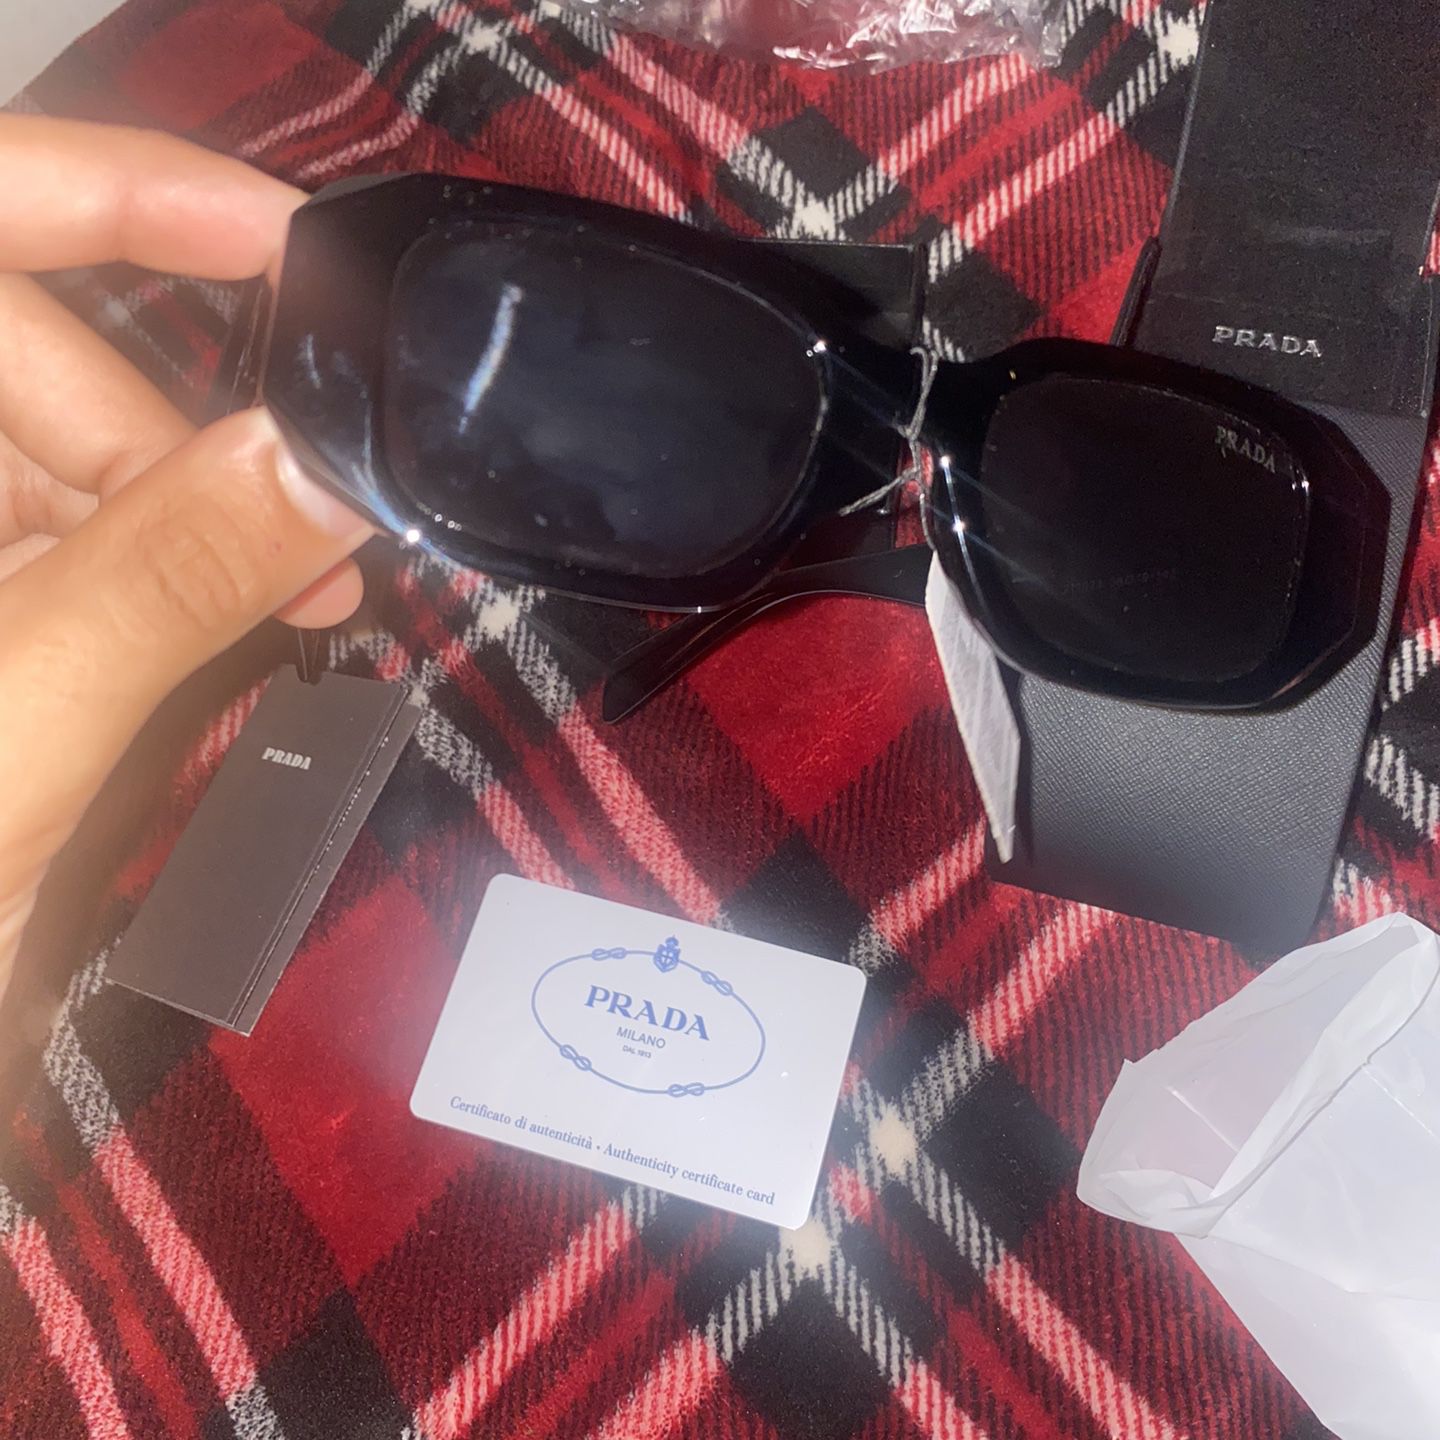 Prada Sunglasses for Sale in The Bronx, NY - OfferUp